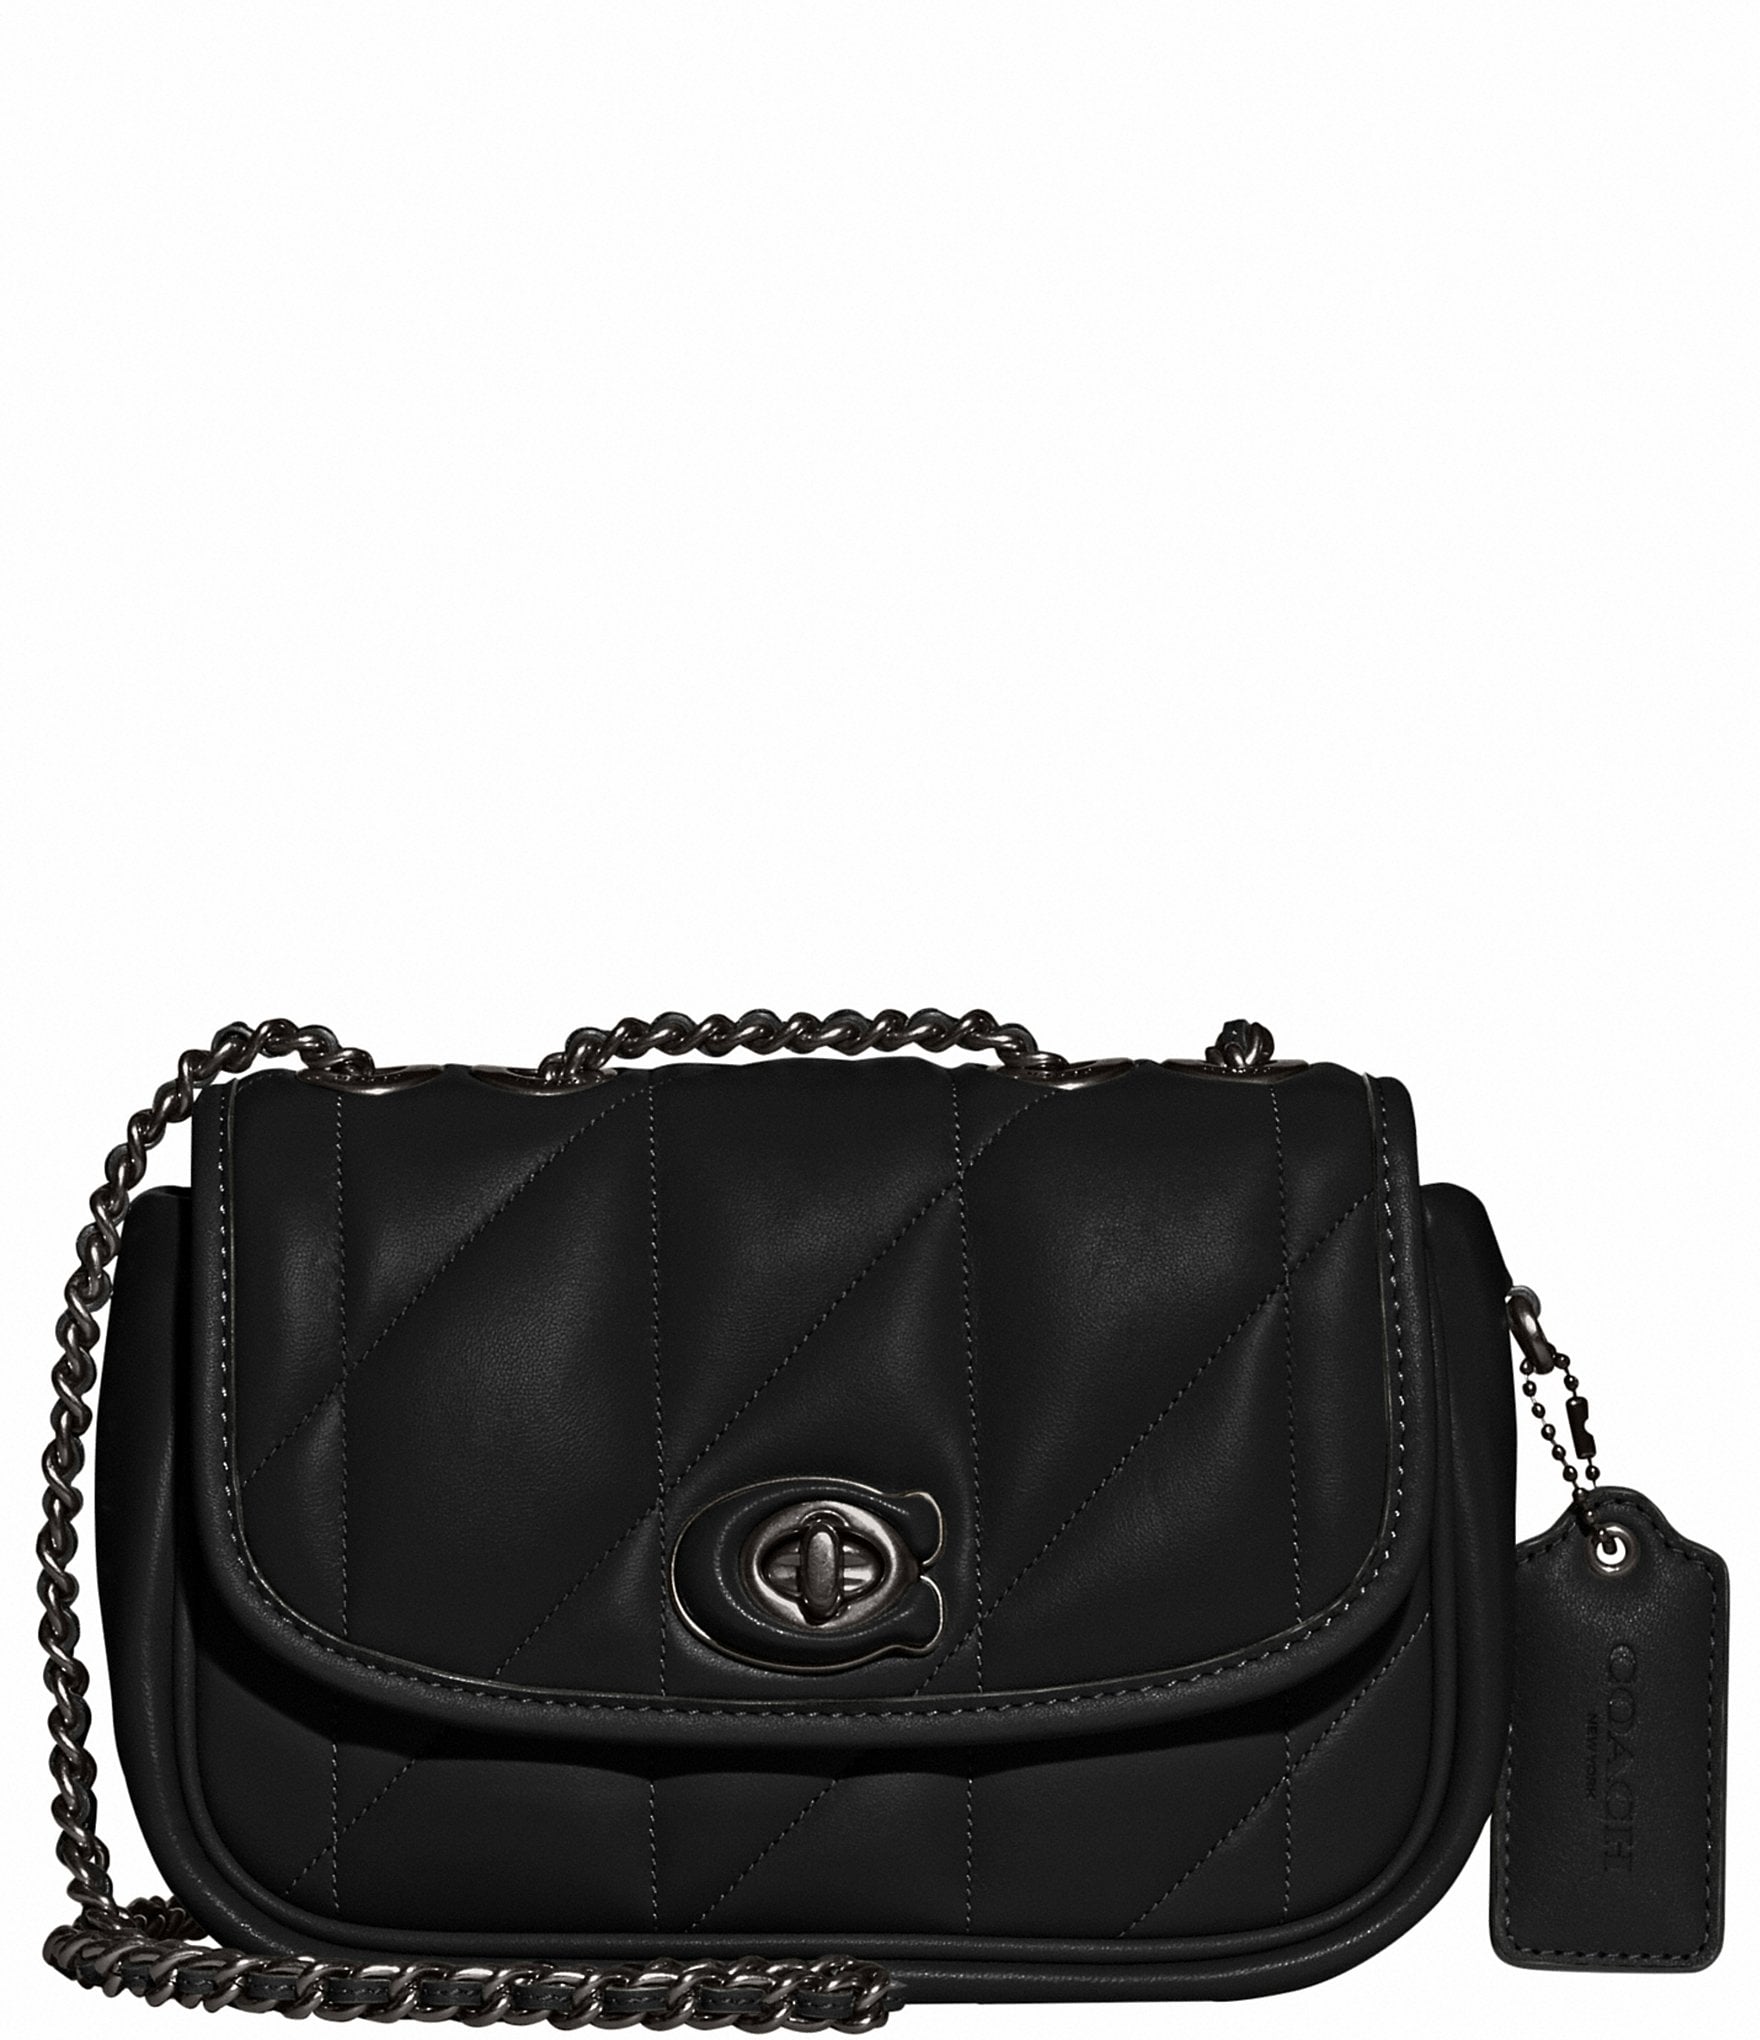 Got the new black on black, quilted Coach heart bag. And ordered some sexy  shoes to go with it. 🥰 : r/handbags